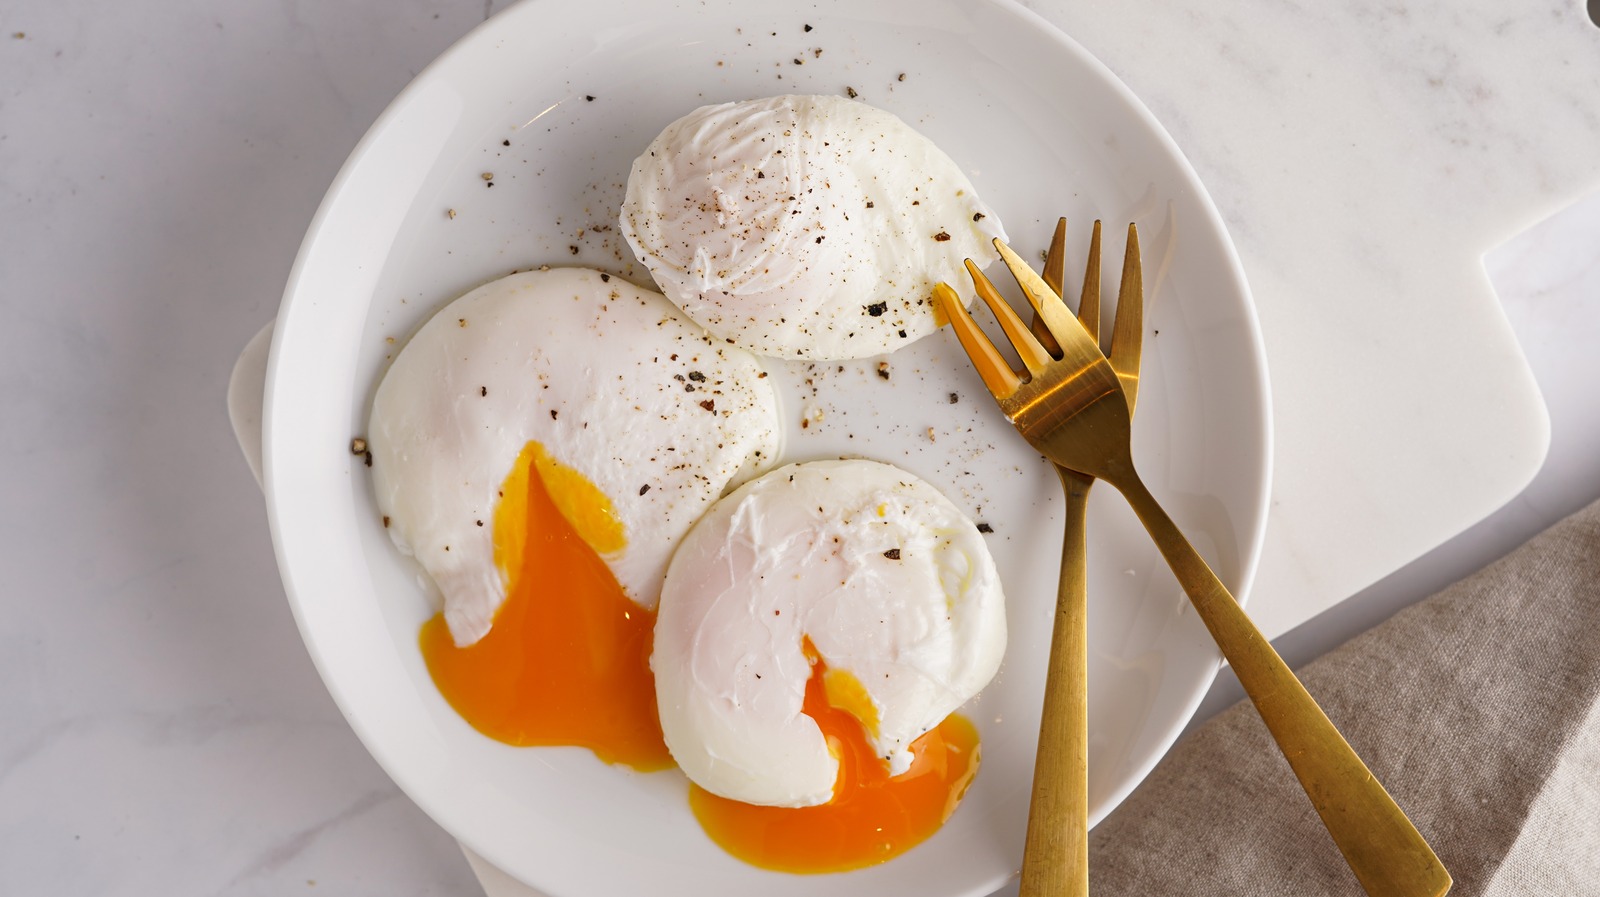 https://www.mashed.com/img/gallery/20-ways-to-poach-eggs-ranked/l-intro-1695733465.jpg